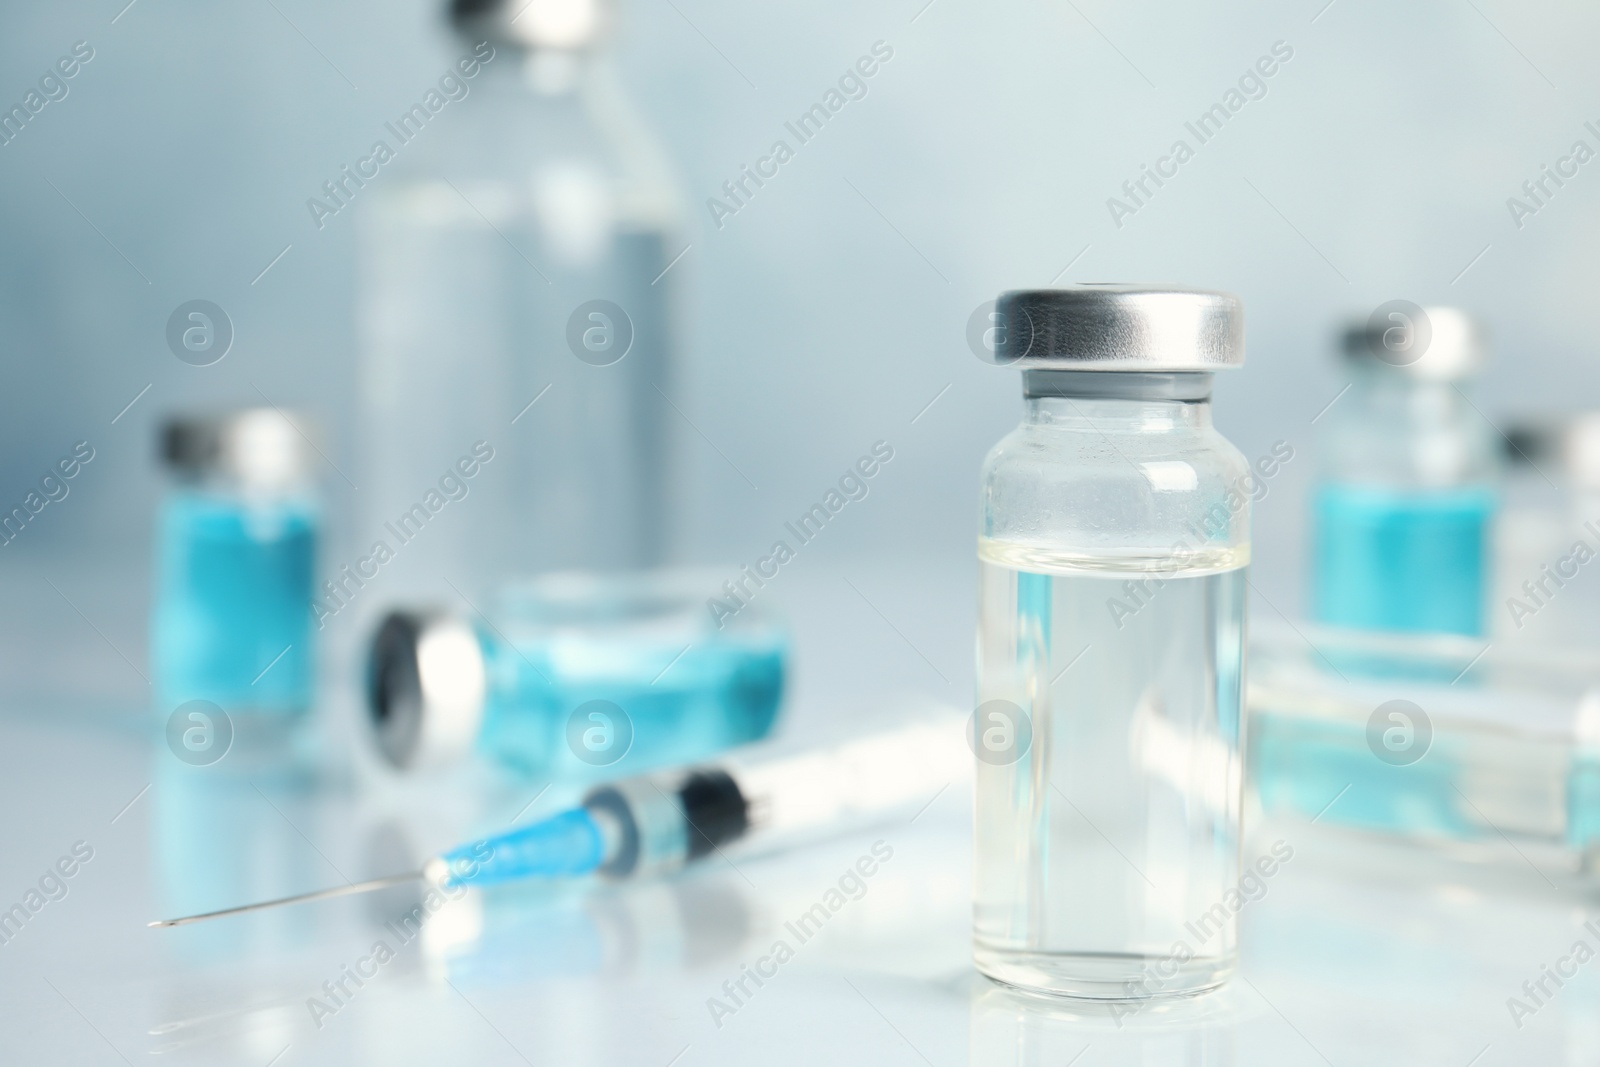 Photo of Vials and syringe on light table. Vaccination and immunization